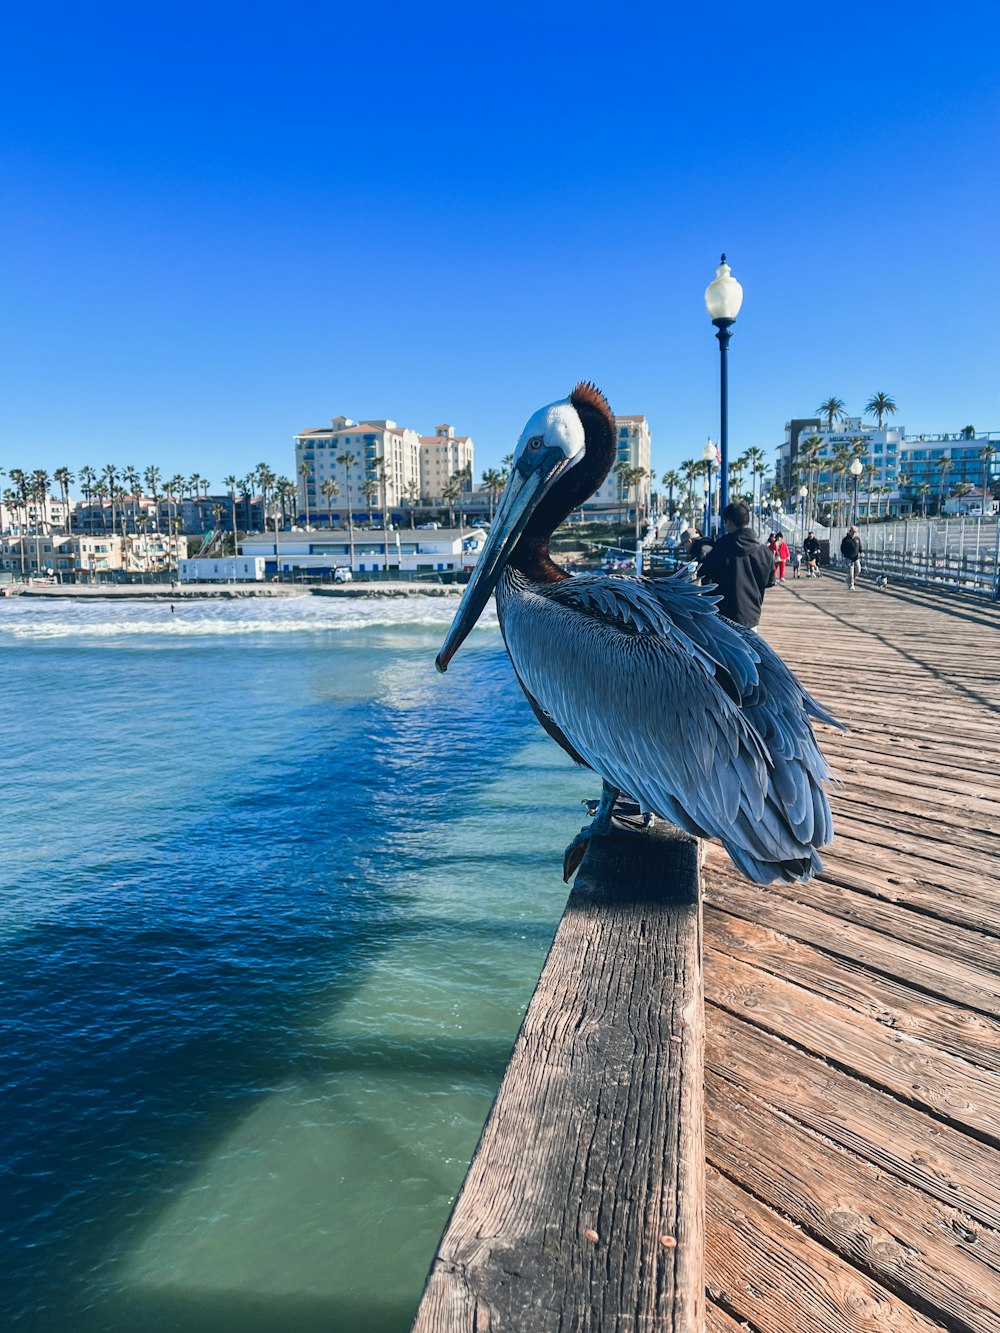 two pelicans are sitting on a dock by the water